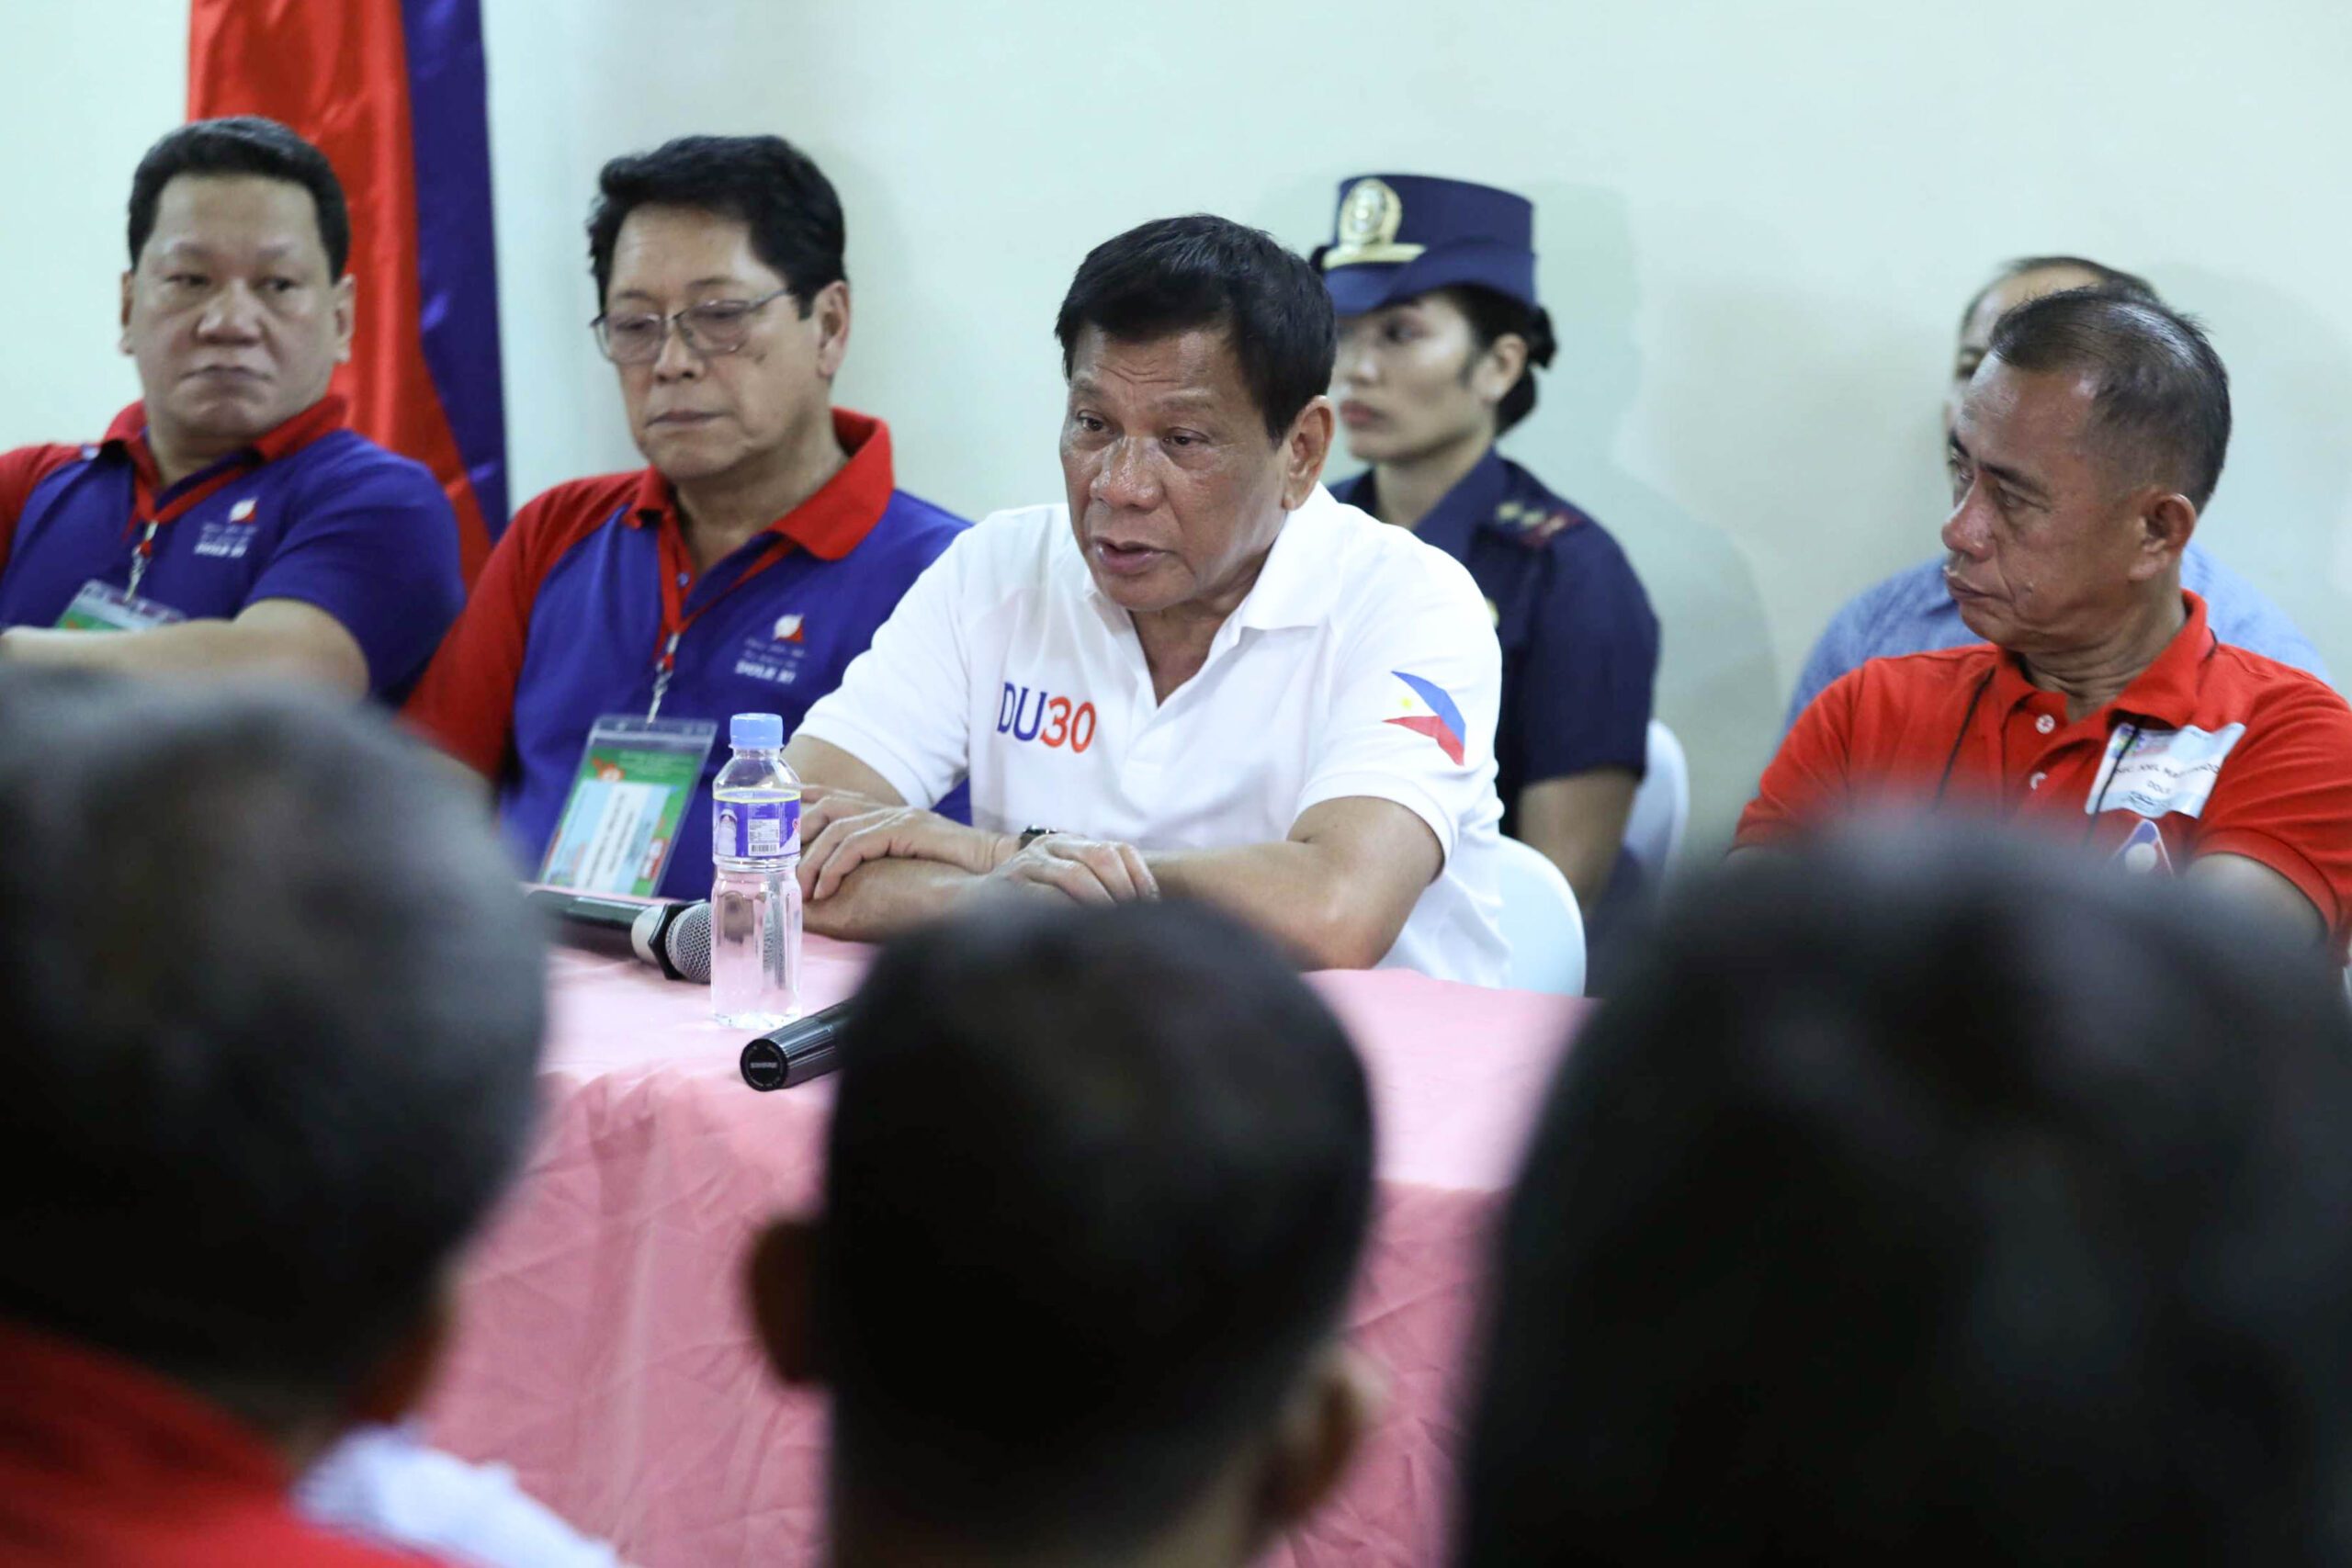 Malacañang: Duterte EO on ‘endo’ to ‘side with labor forces’